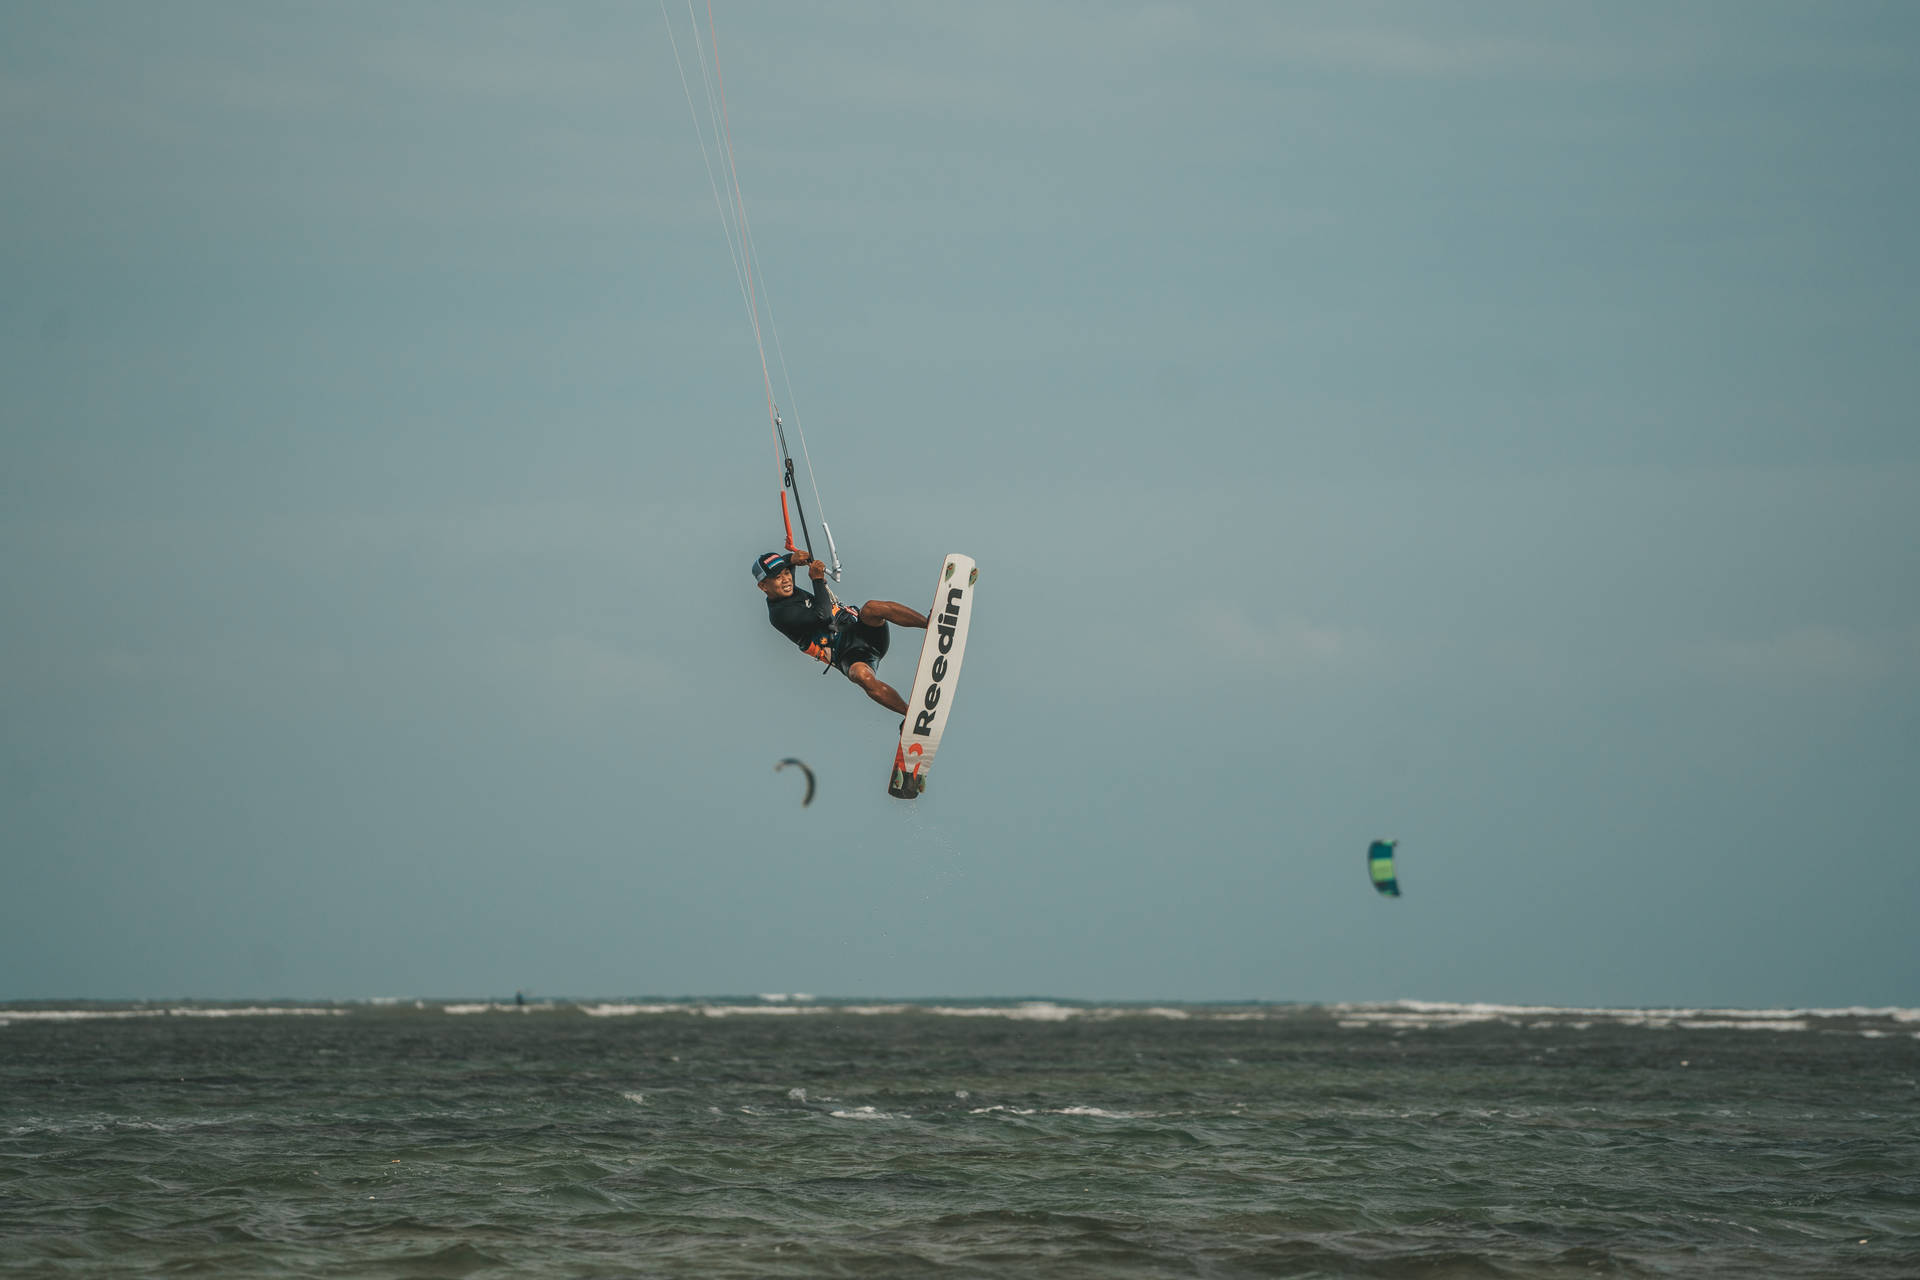 Tilted Windsurfing In Air Background